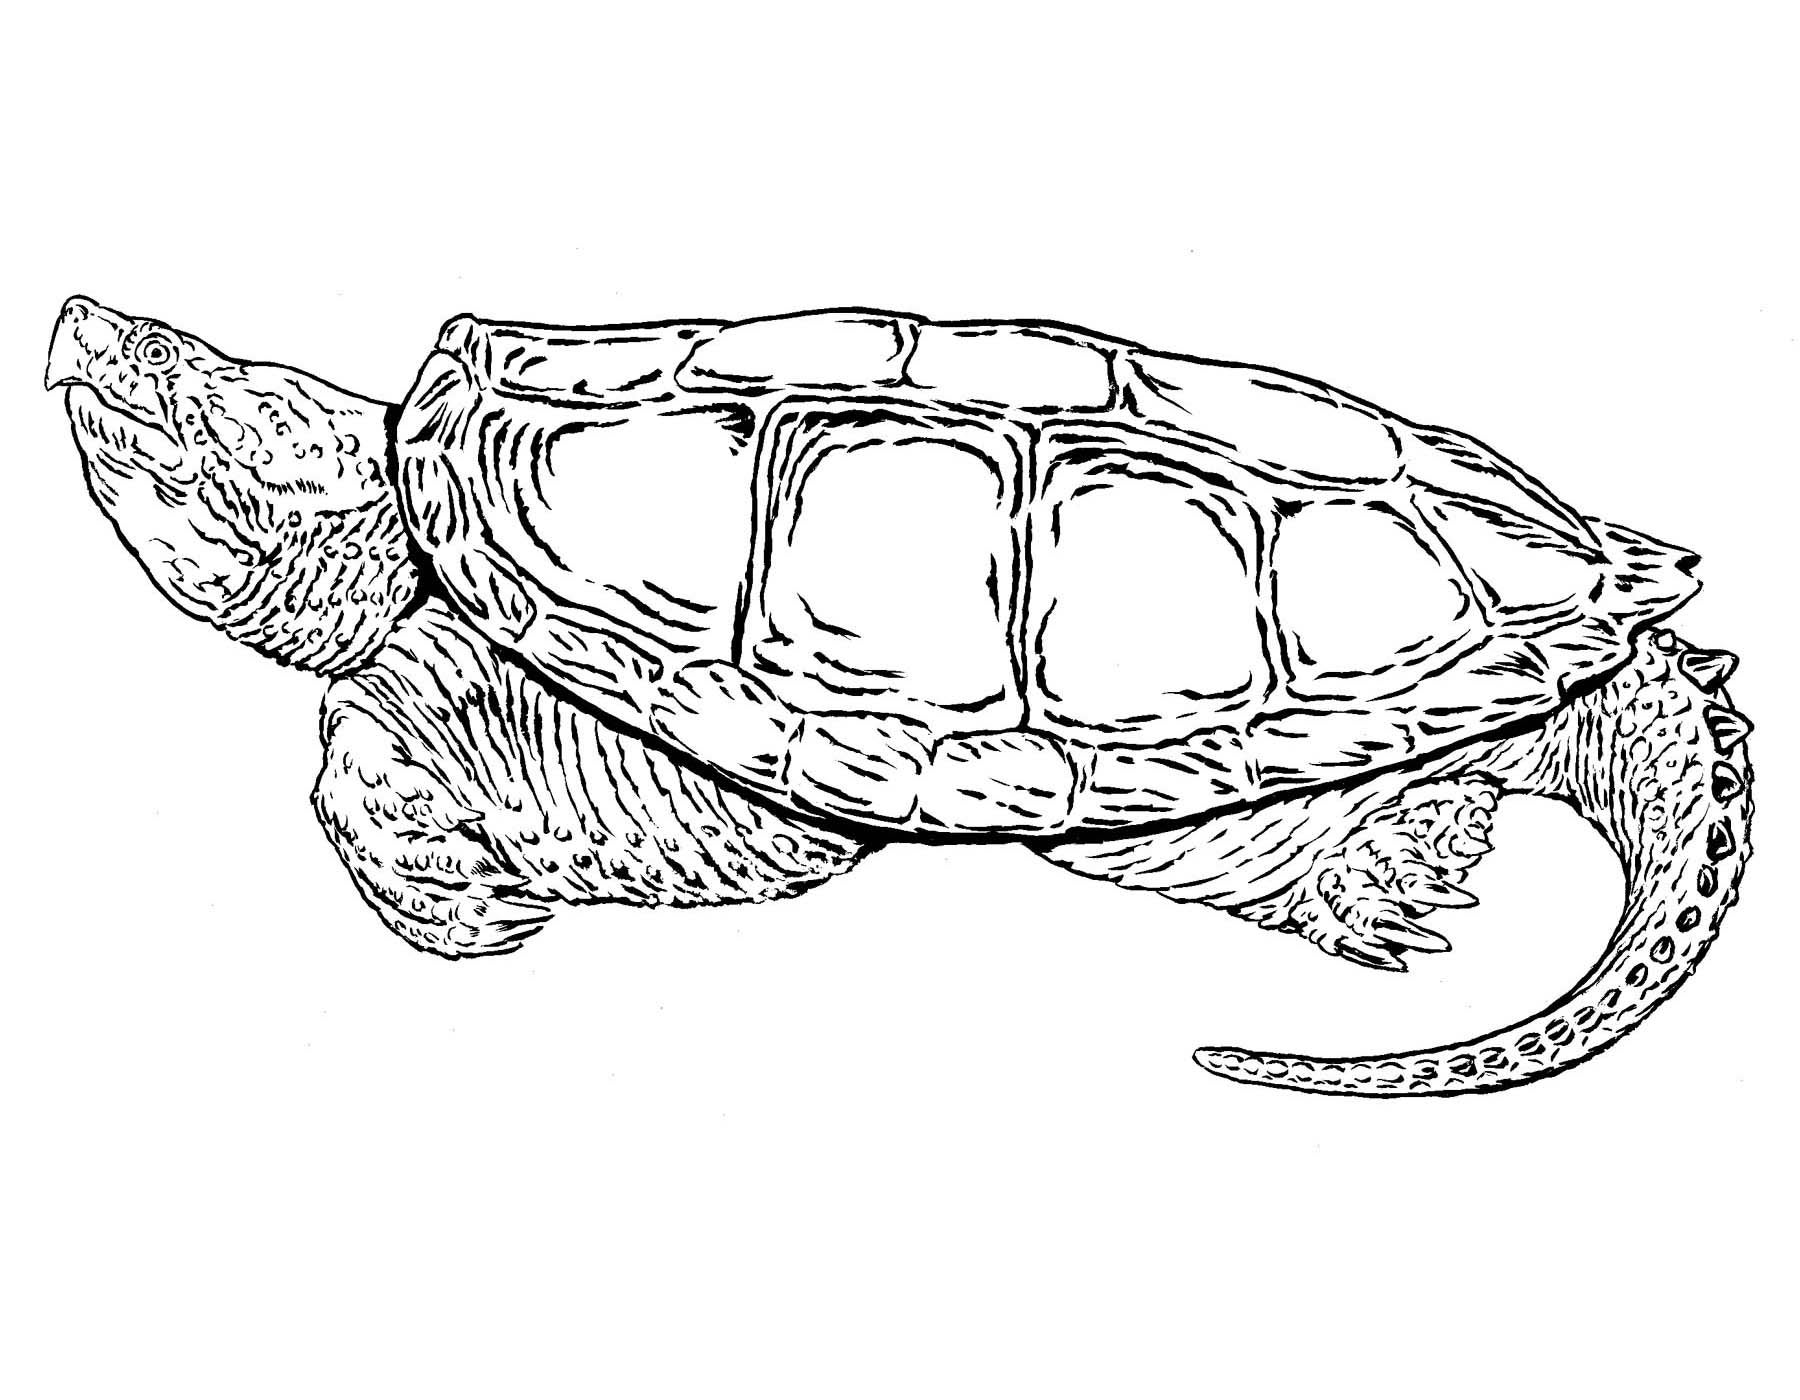 Common Snapping Turtle Control | Missouri Department of Conservation